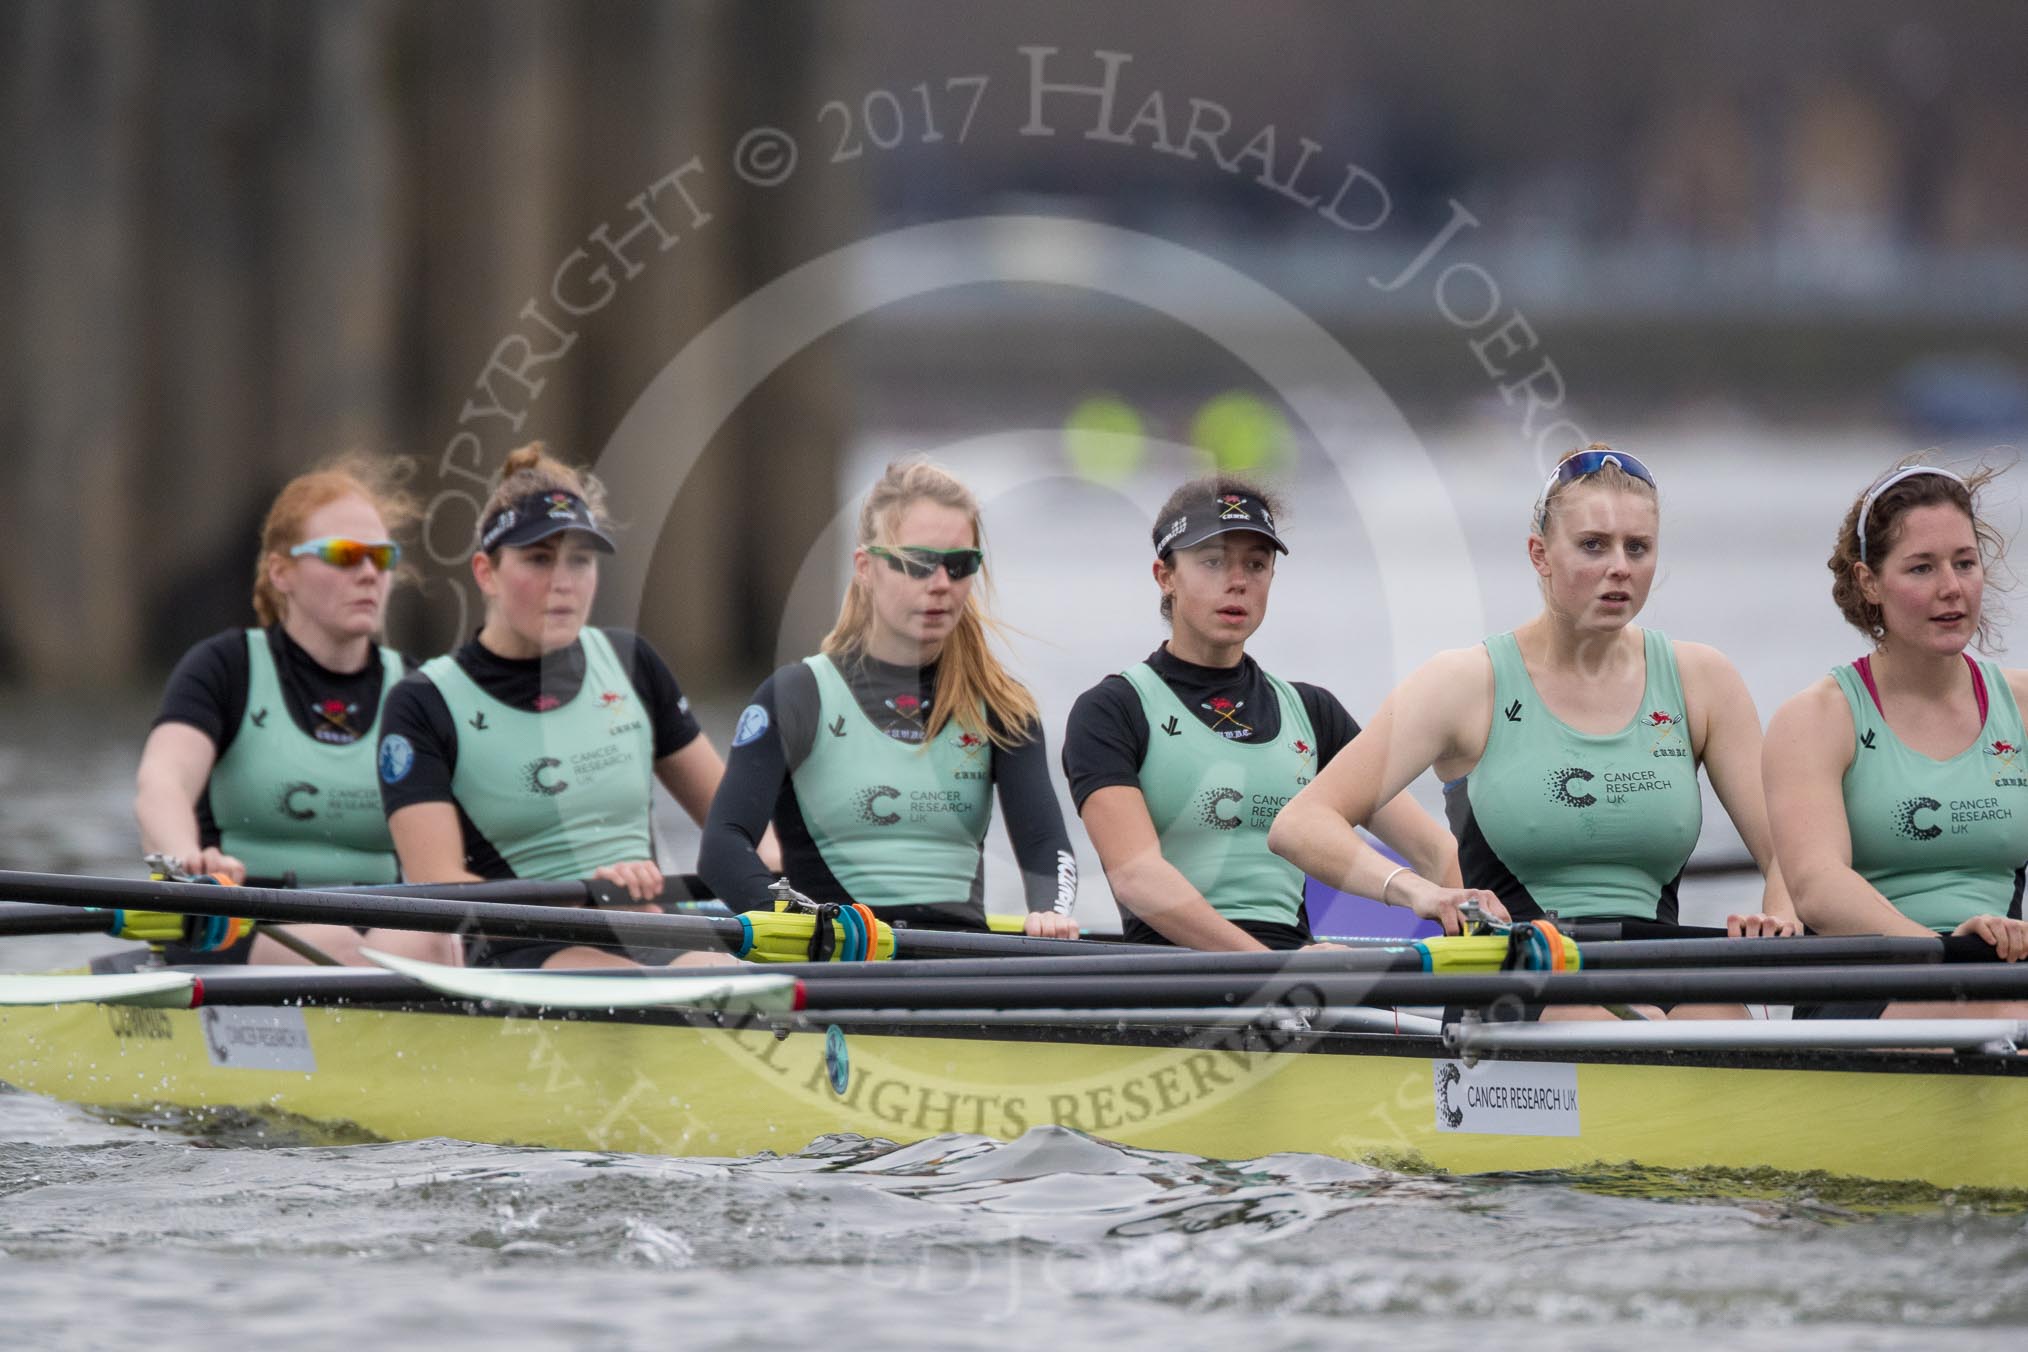 The Boat Race season 2017 - Women's Boat Race Fixture CUWBC vs Univerity of London: The CUWBC eight before the start of the race, bow - Claire Lambe, 2 - Kirsten Van Fosen, 3 - Ashton Brown, 4 - Imogen Grant, 5 - Holy Hill, 6 - Melissa Wilson.
River Thames between Putney Bridge and Mortlake,
London SW15,

United Kingdom,
on 19 February 2017 at 15:58, image #49